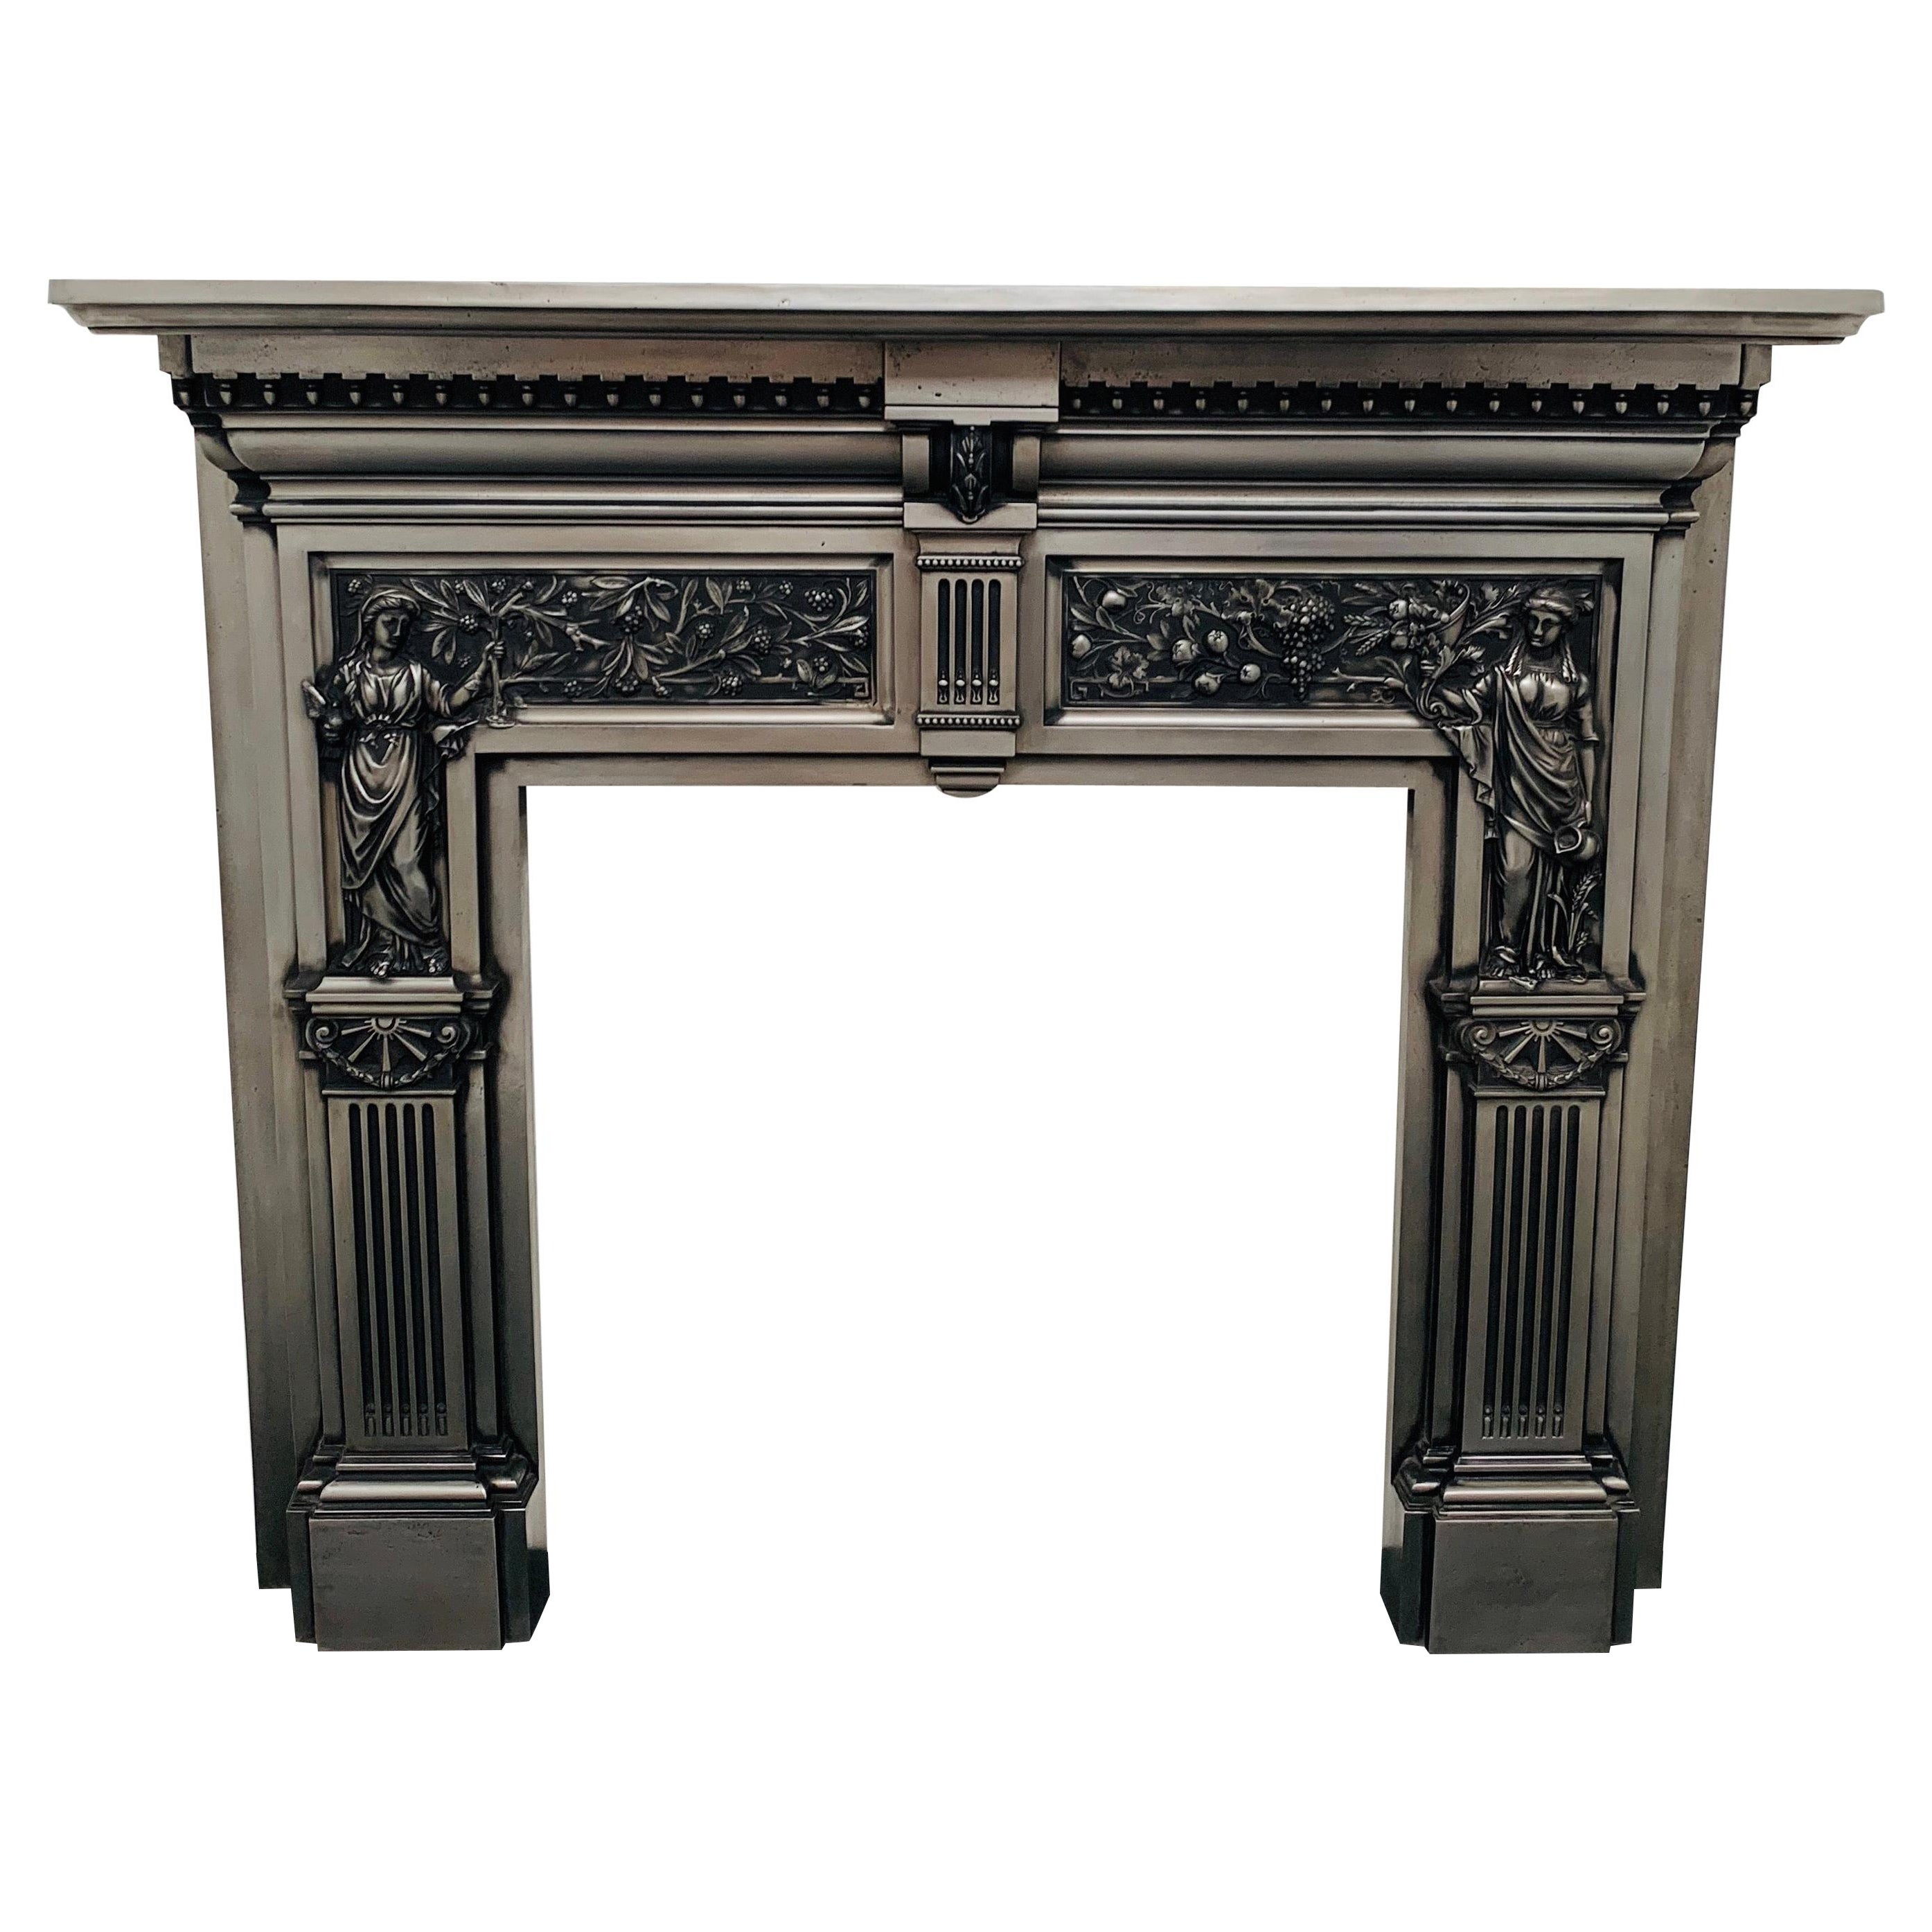 19th Century Burnished Cast Iron Fireplace Mantlepiece